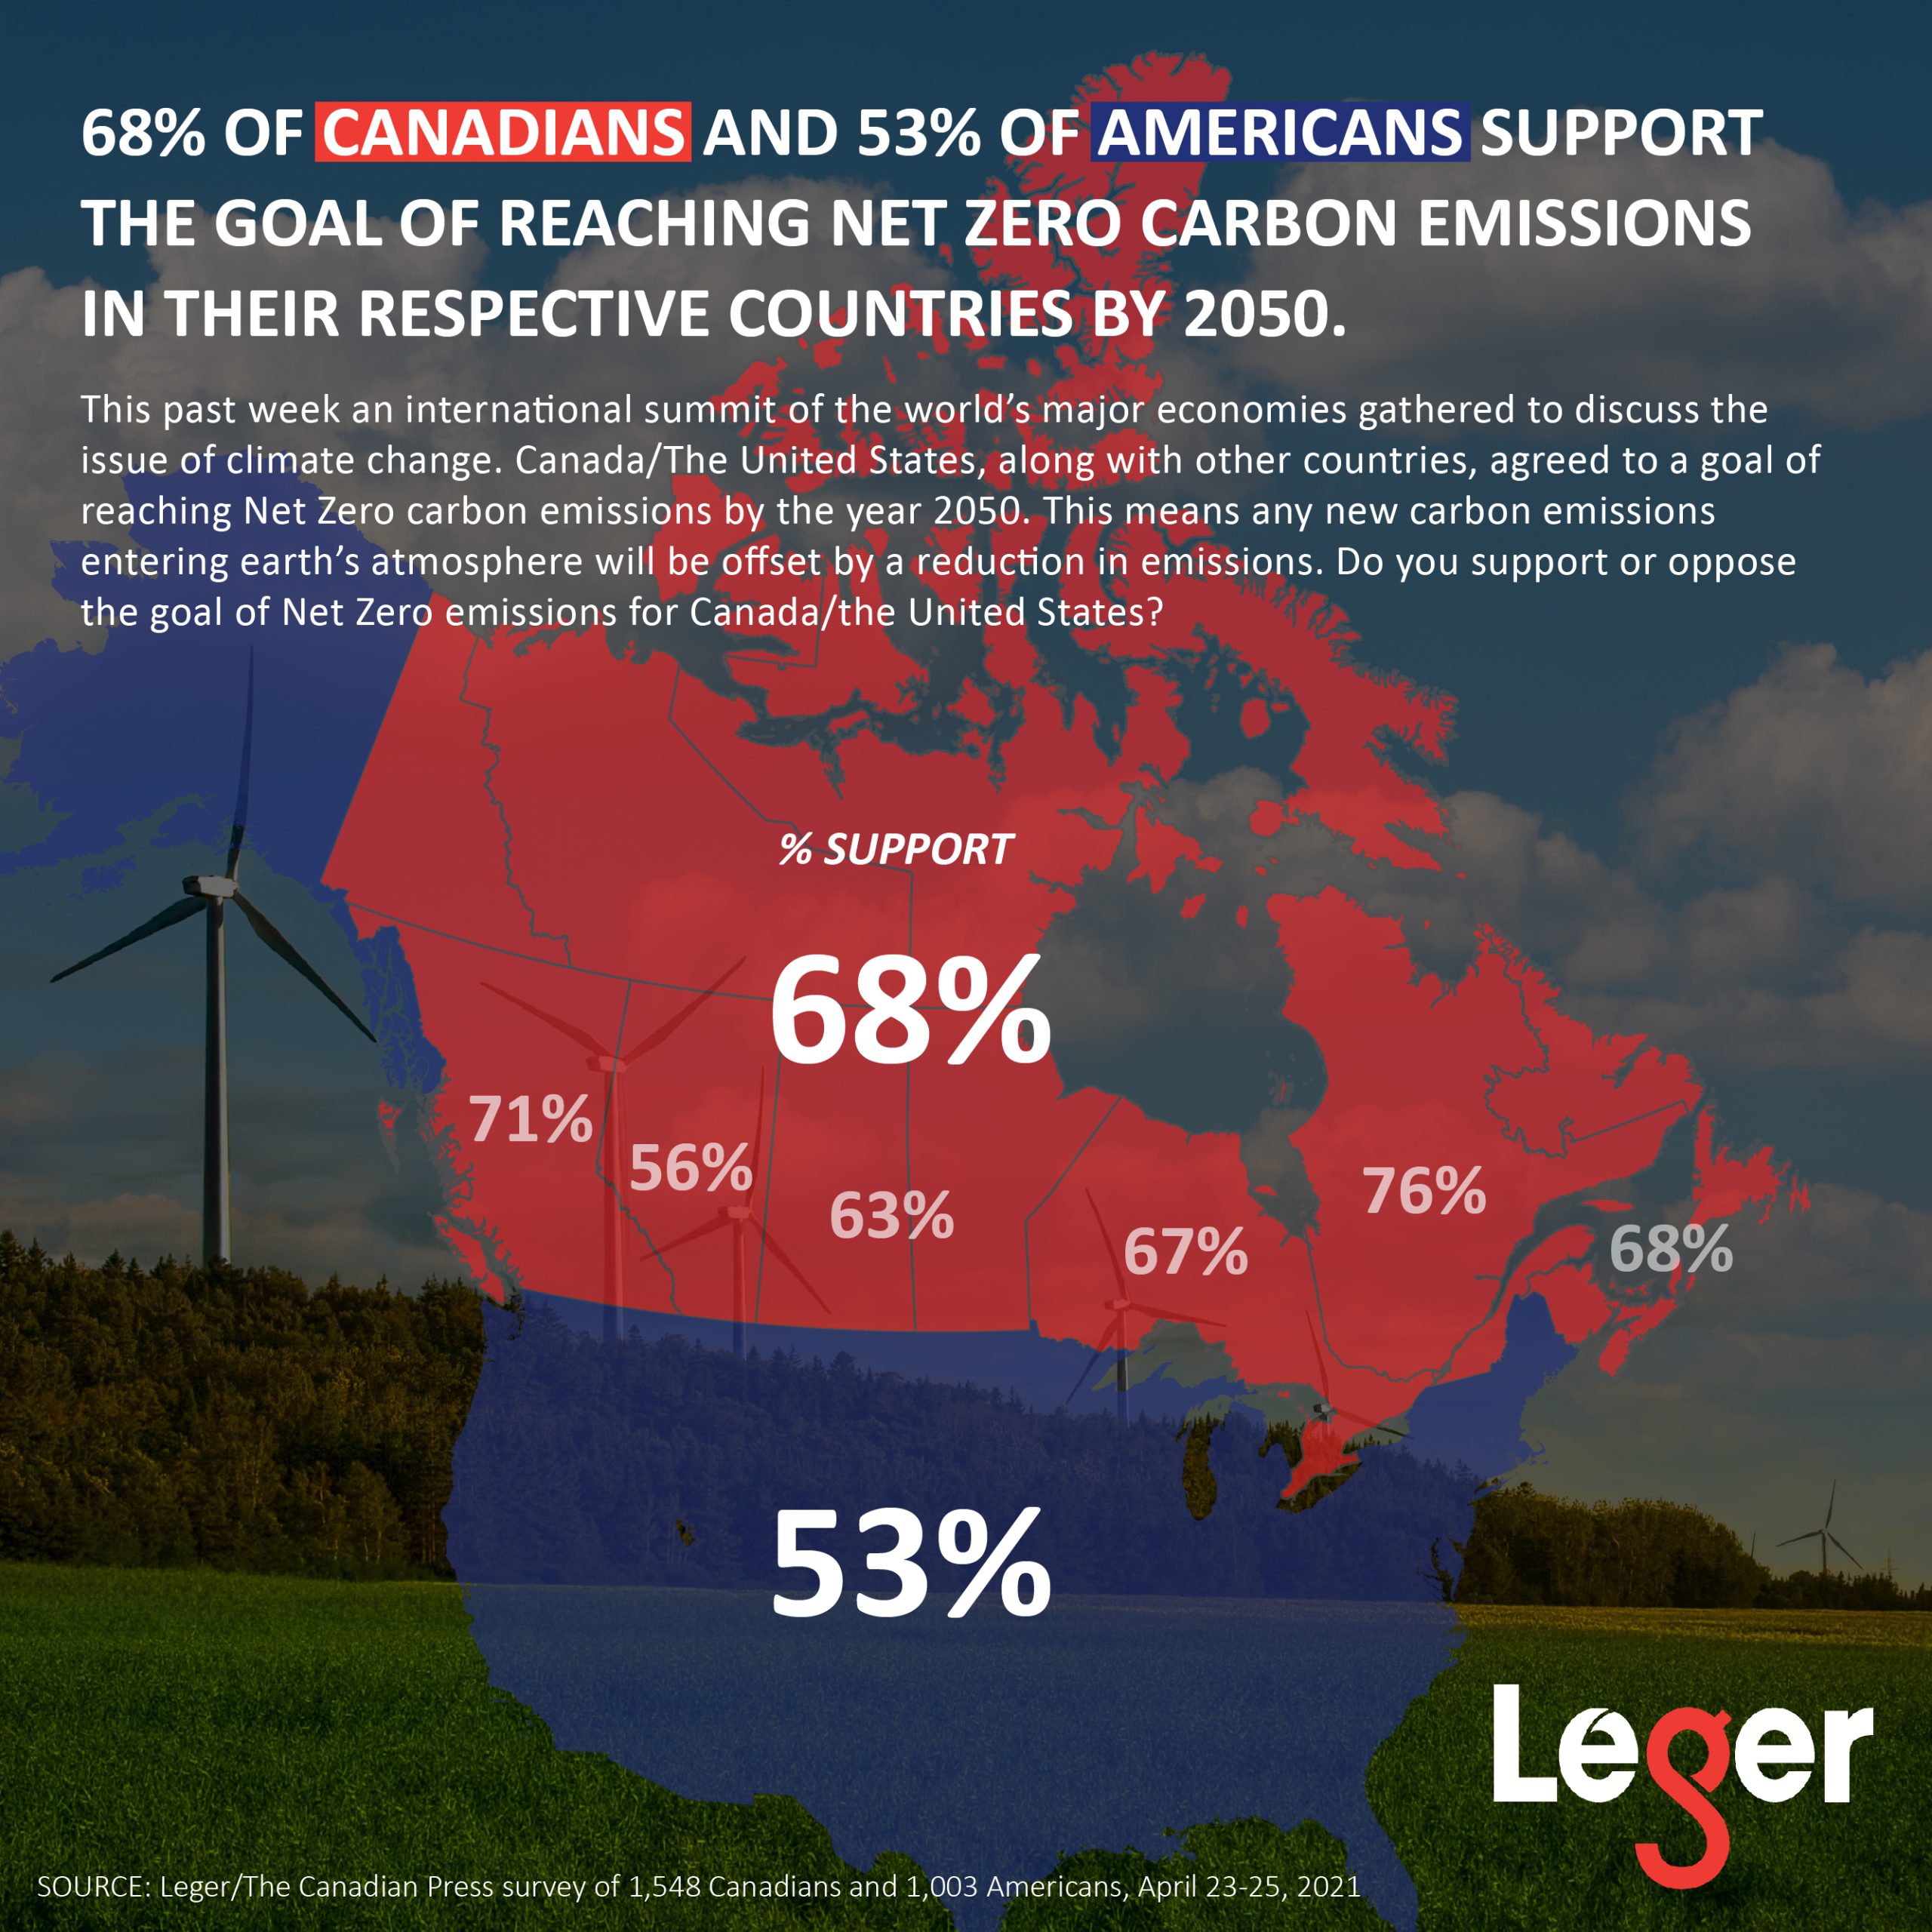 68% of Canadians and 53% of Americans support the goal of reaching Net Zero carbon emissions in their respective countries by 2050.